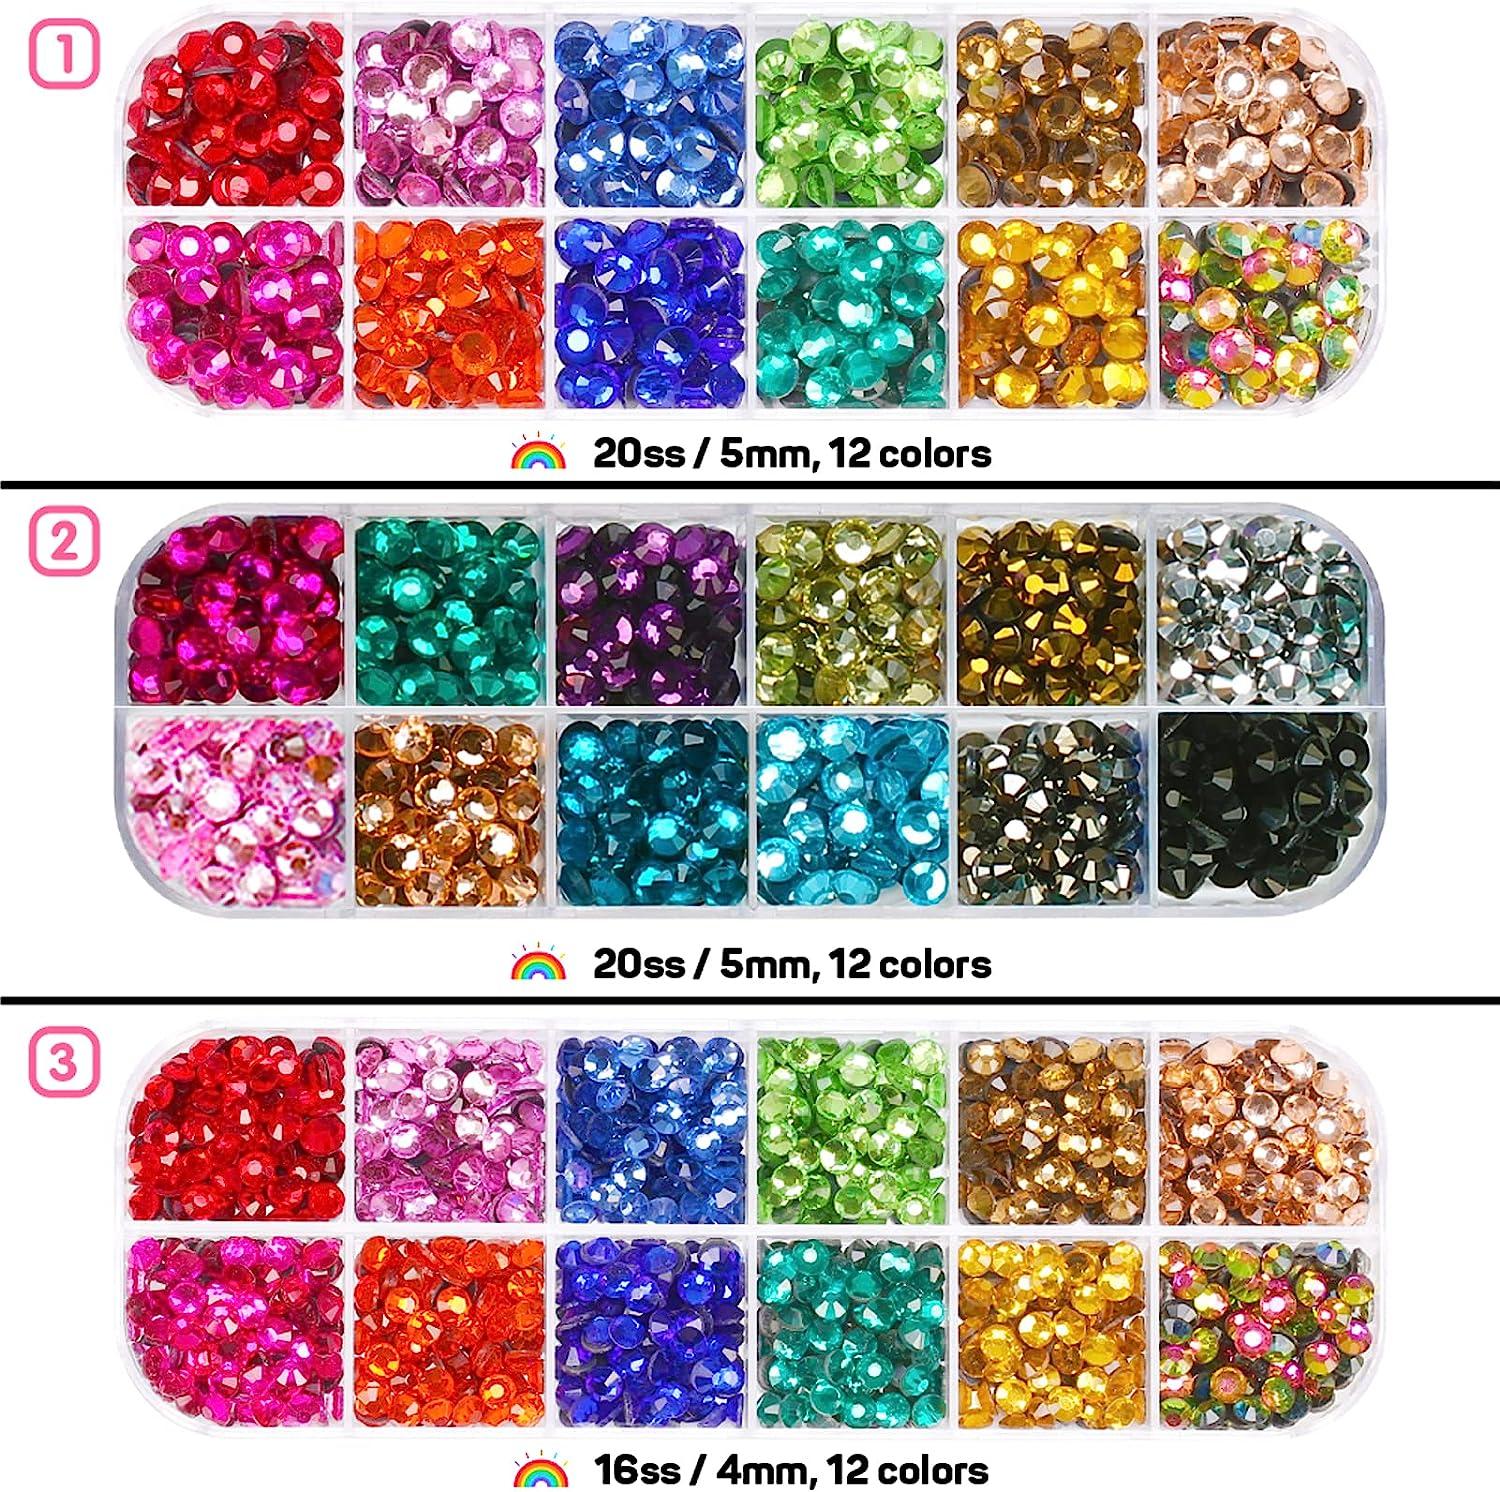 Hotfix Rhinestones Applicator with Large Rinestones Set, Flatback Pearls  for Crafts Clothes Shoes, Bedazzler Kit with Rhinestones Hot Fixed  Applicator Hot Fix Tool Badazzle Templates Crystal Bedazzle Pink